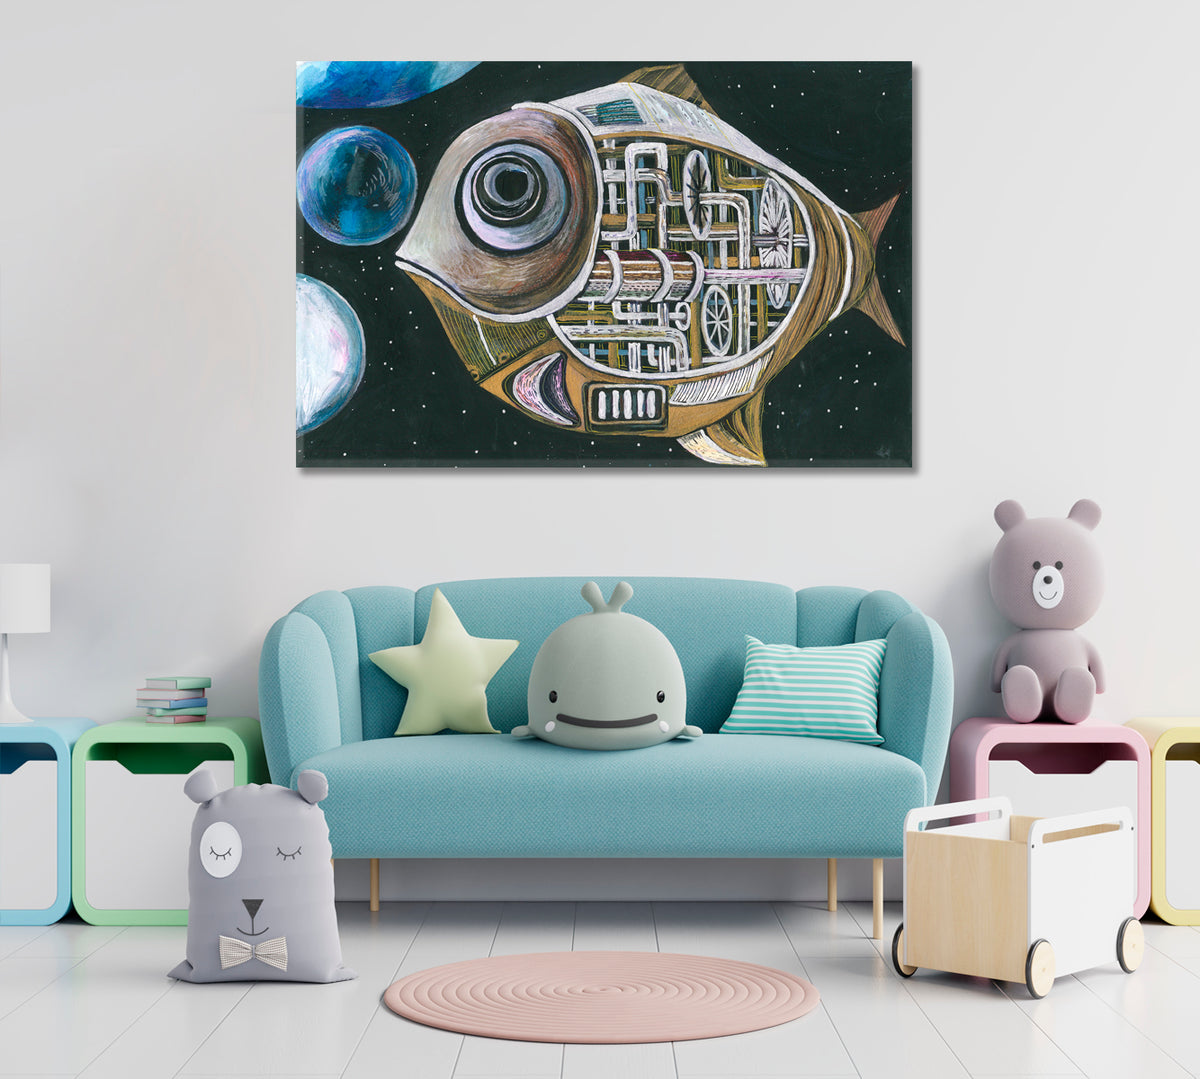 Big Space Mechanical Fish Surreal Abstract Steampunk Style Contemporary Art Artesty 1 panel 24" x 16" 